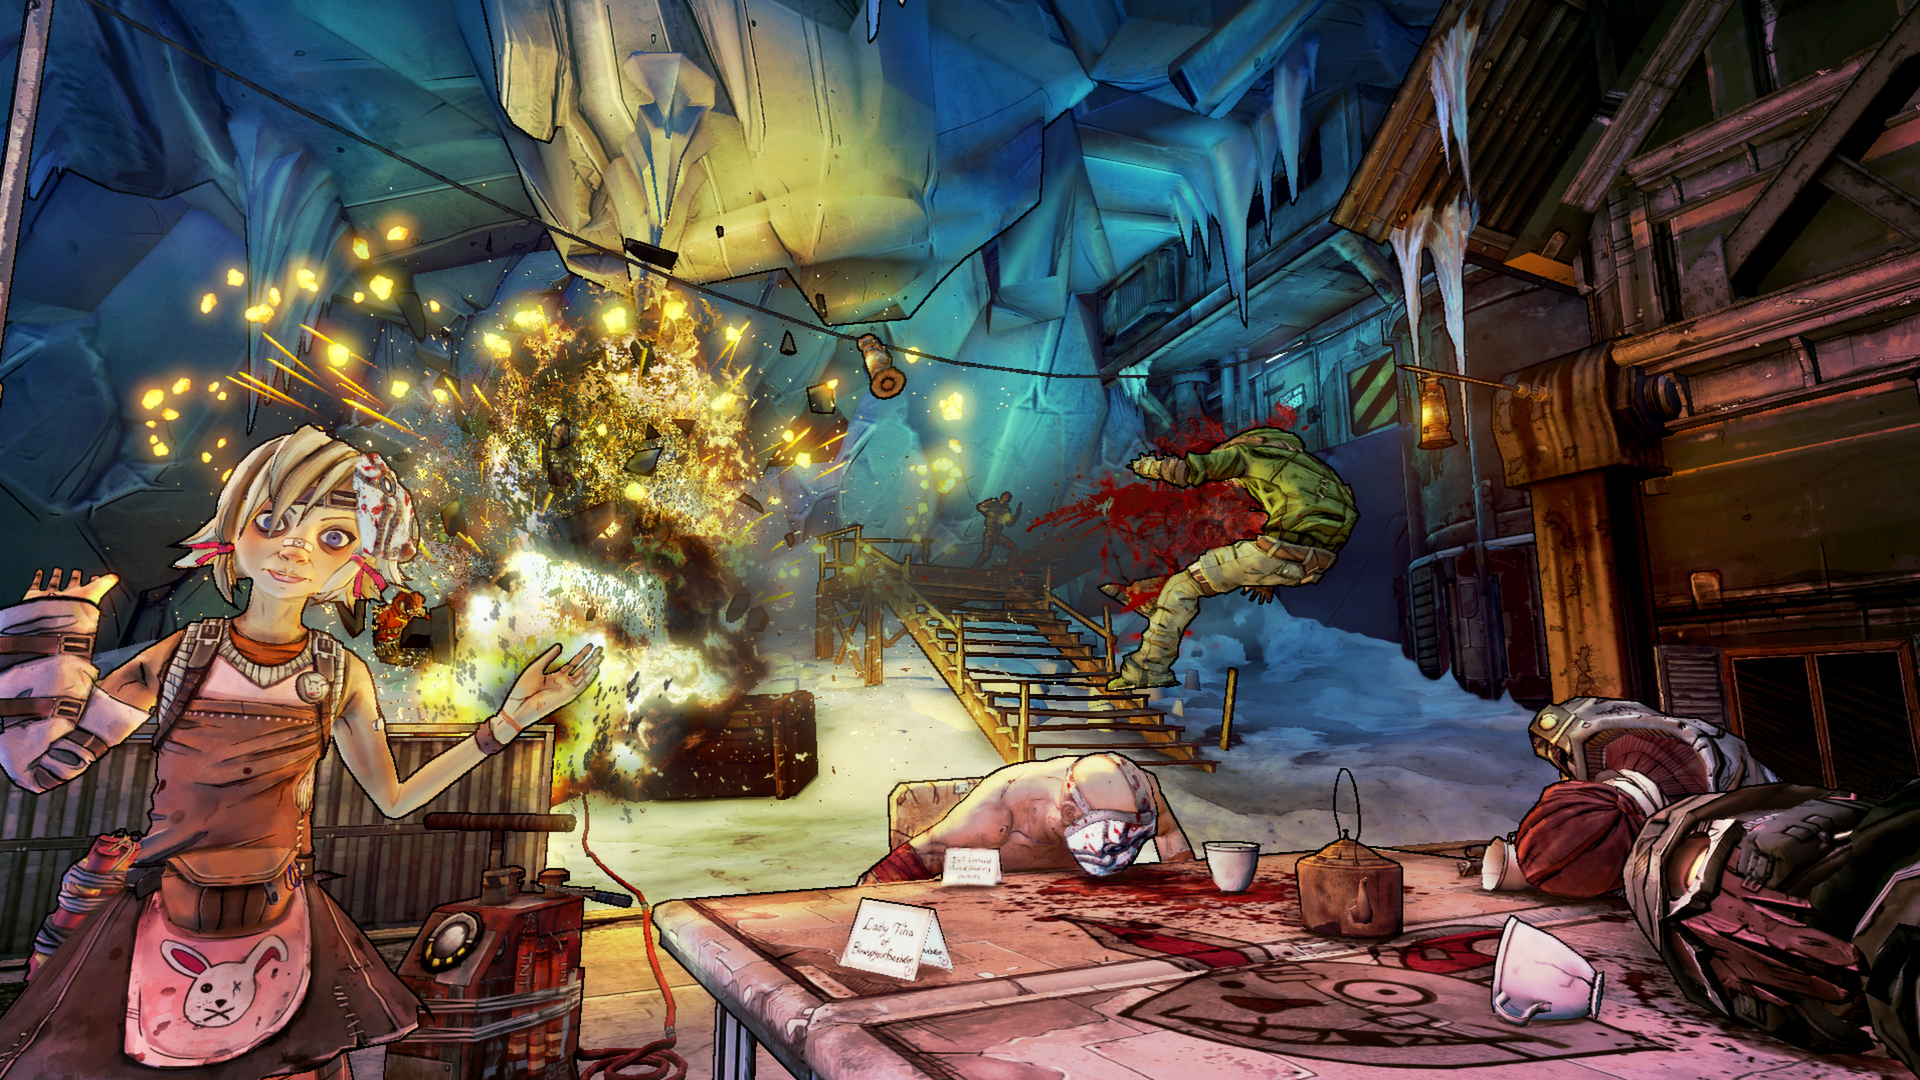 Replay Borderlands 2 With This Big Overhaul Mod Pc Gamer